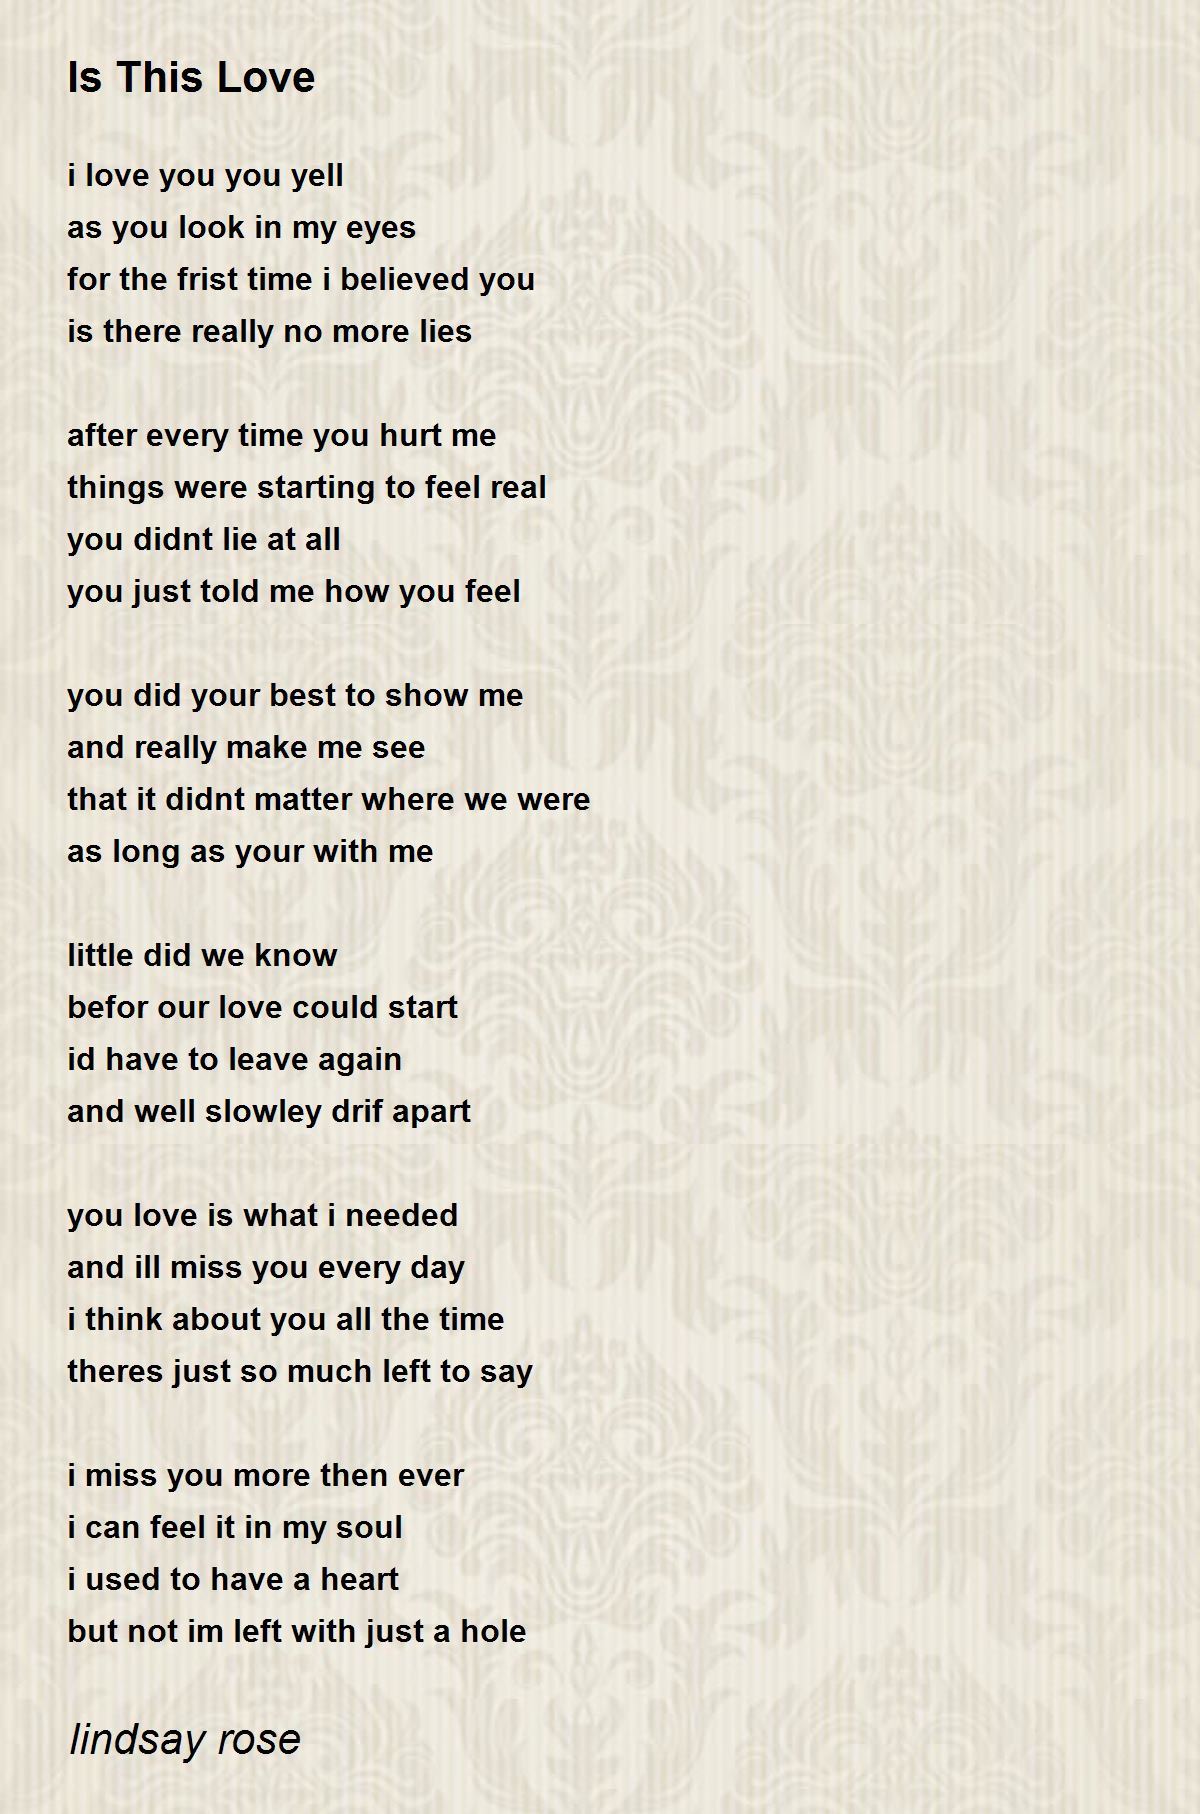 Your Love Is A Lie - Your Love Is A Lie Poem by Twisted Rose